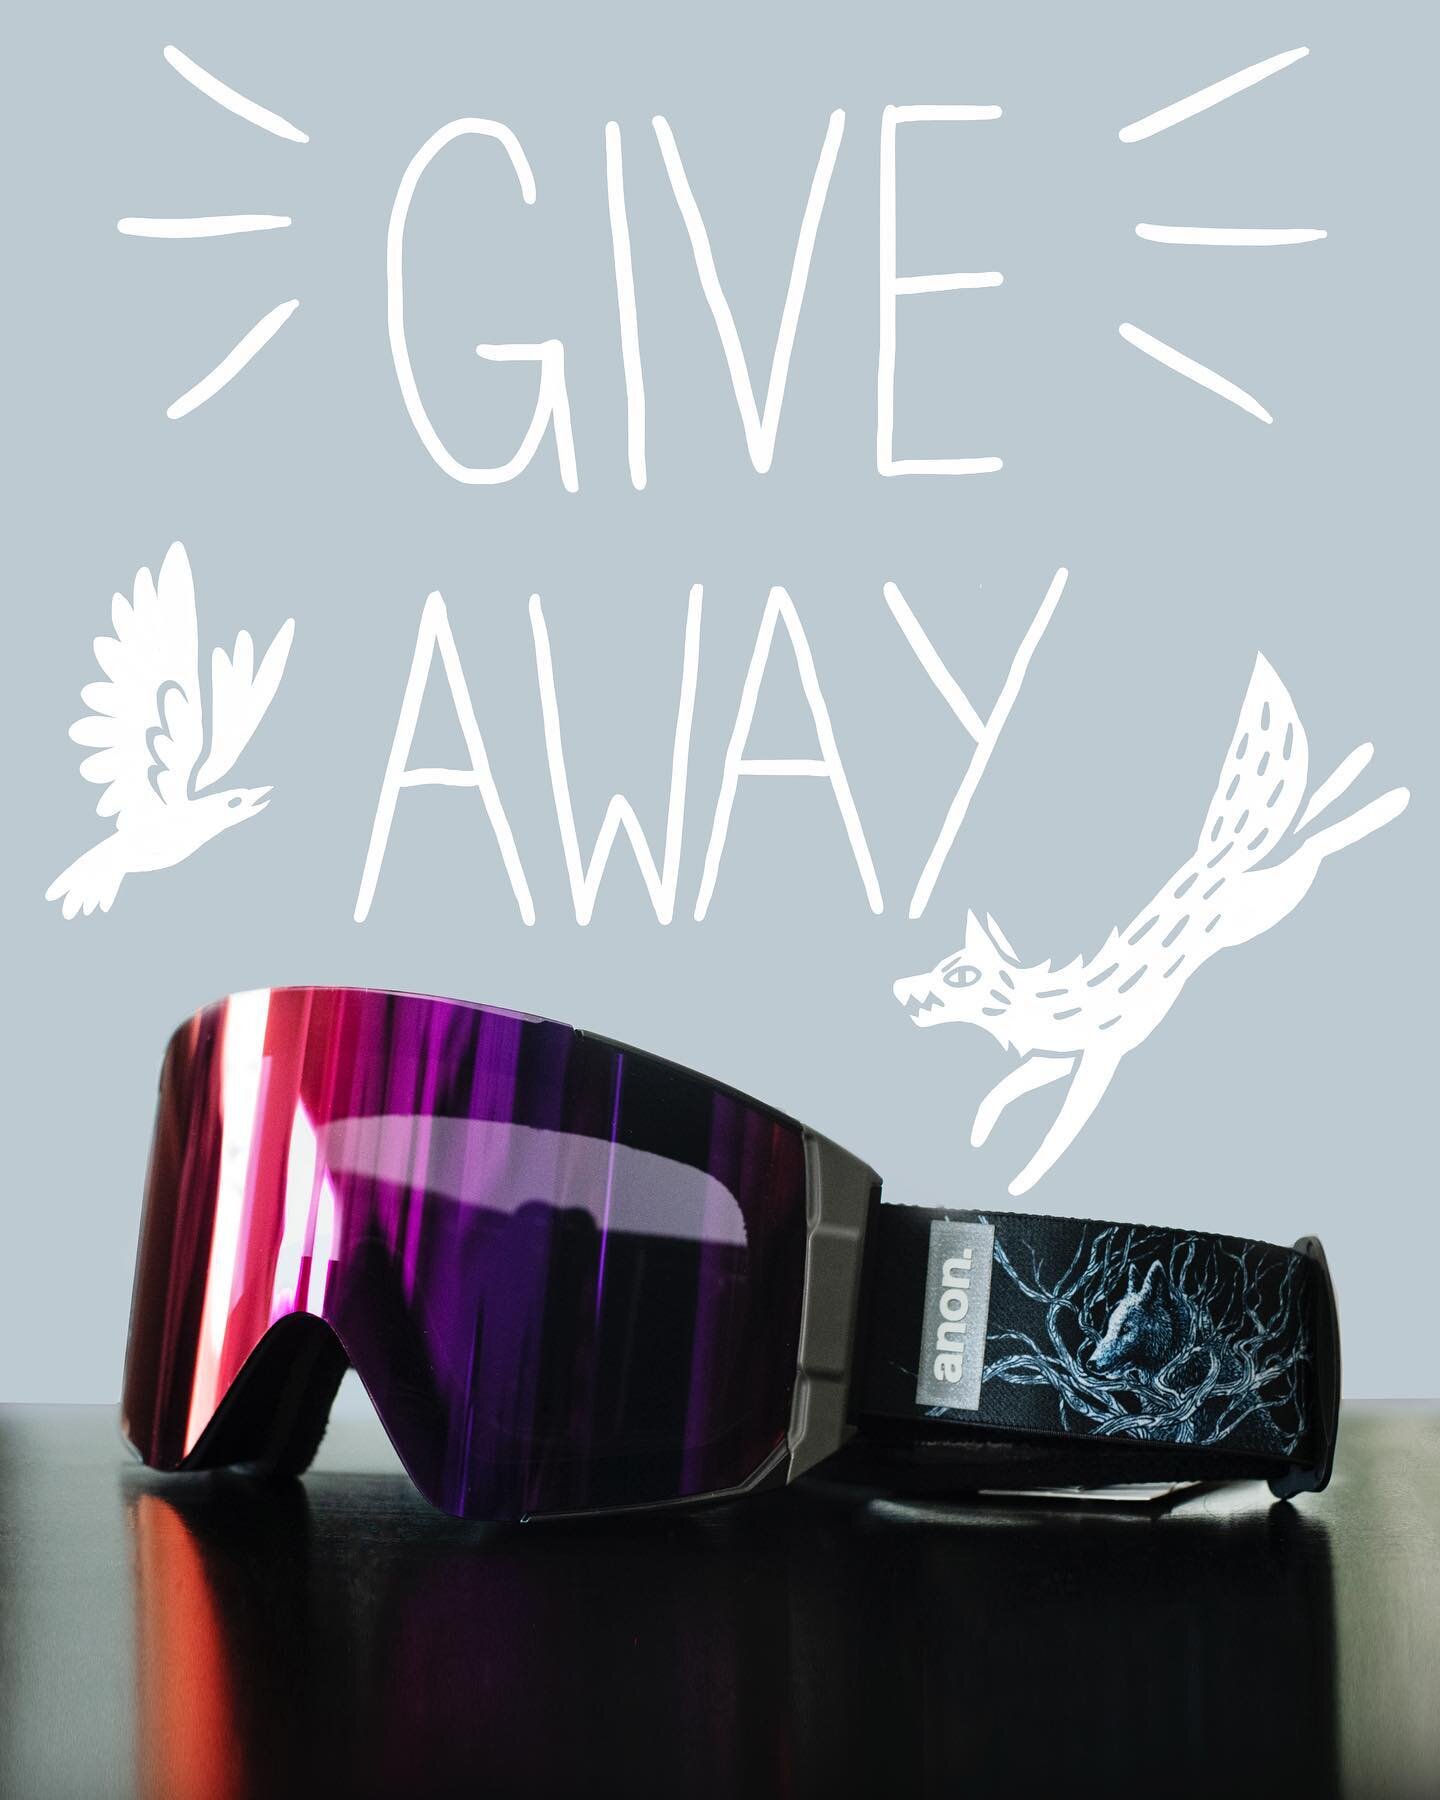 GIVE AWAY TIME! So excited to share this with you all. Here&rsquo;s your chance to win a pair of the Sync goggles in the Rocka colourway I designed with @anonoptics. 

These goggles are unisex/gender neutral and have magna tech so lens swaps are a pi